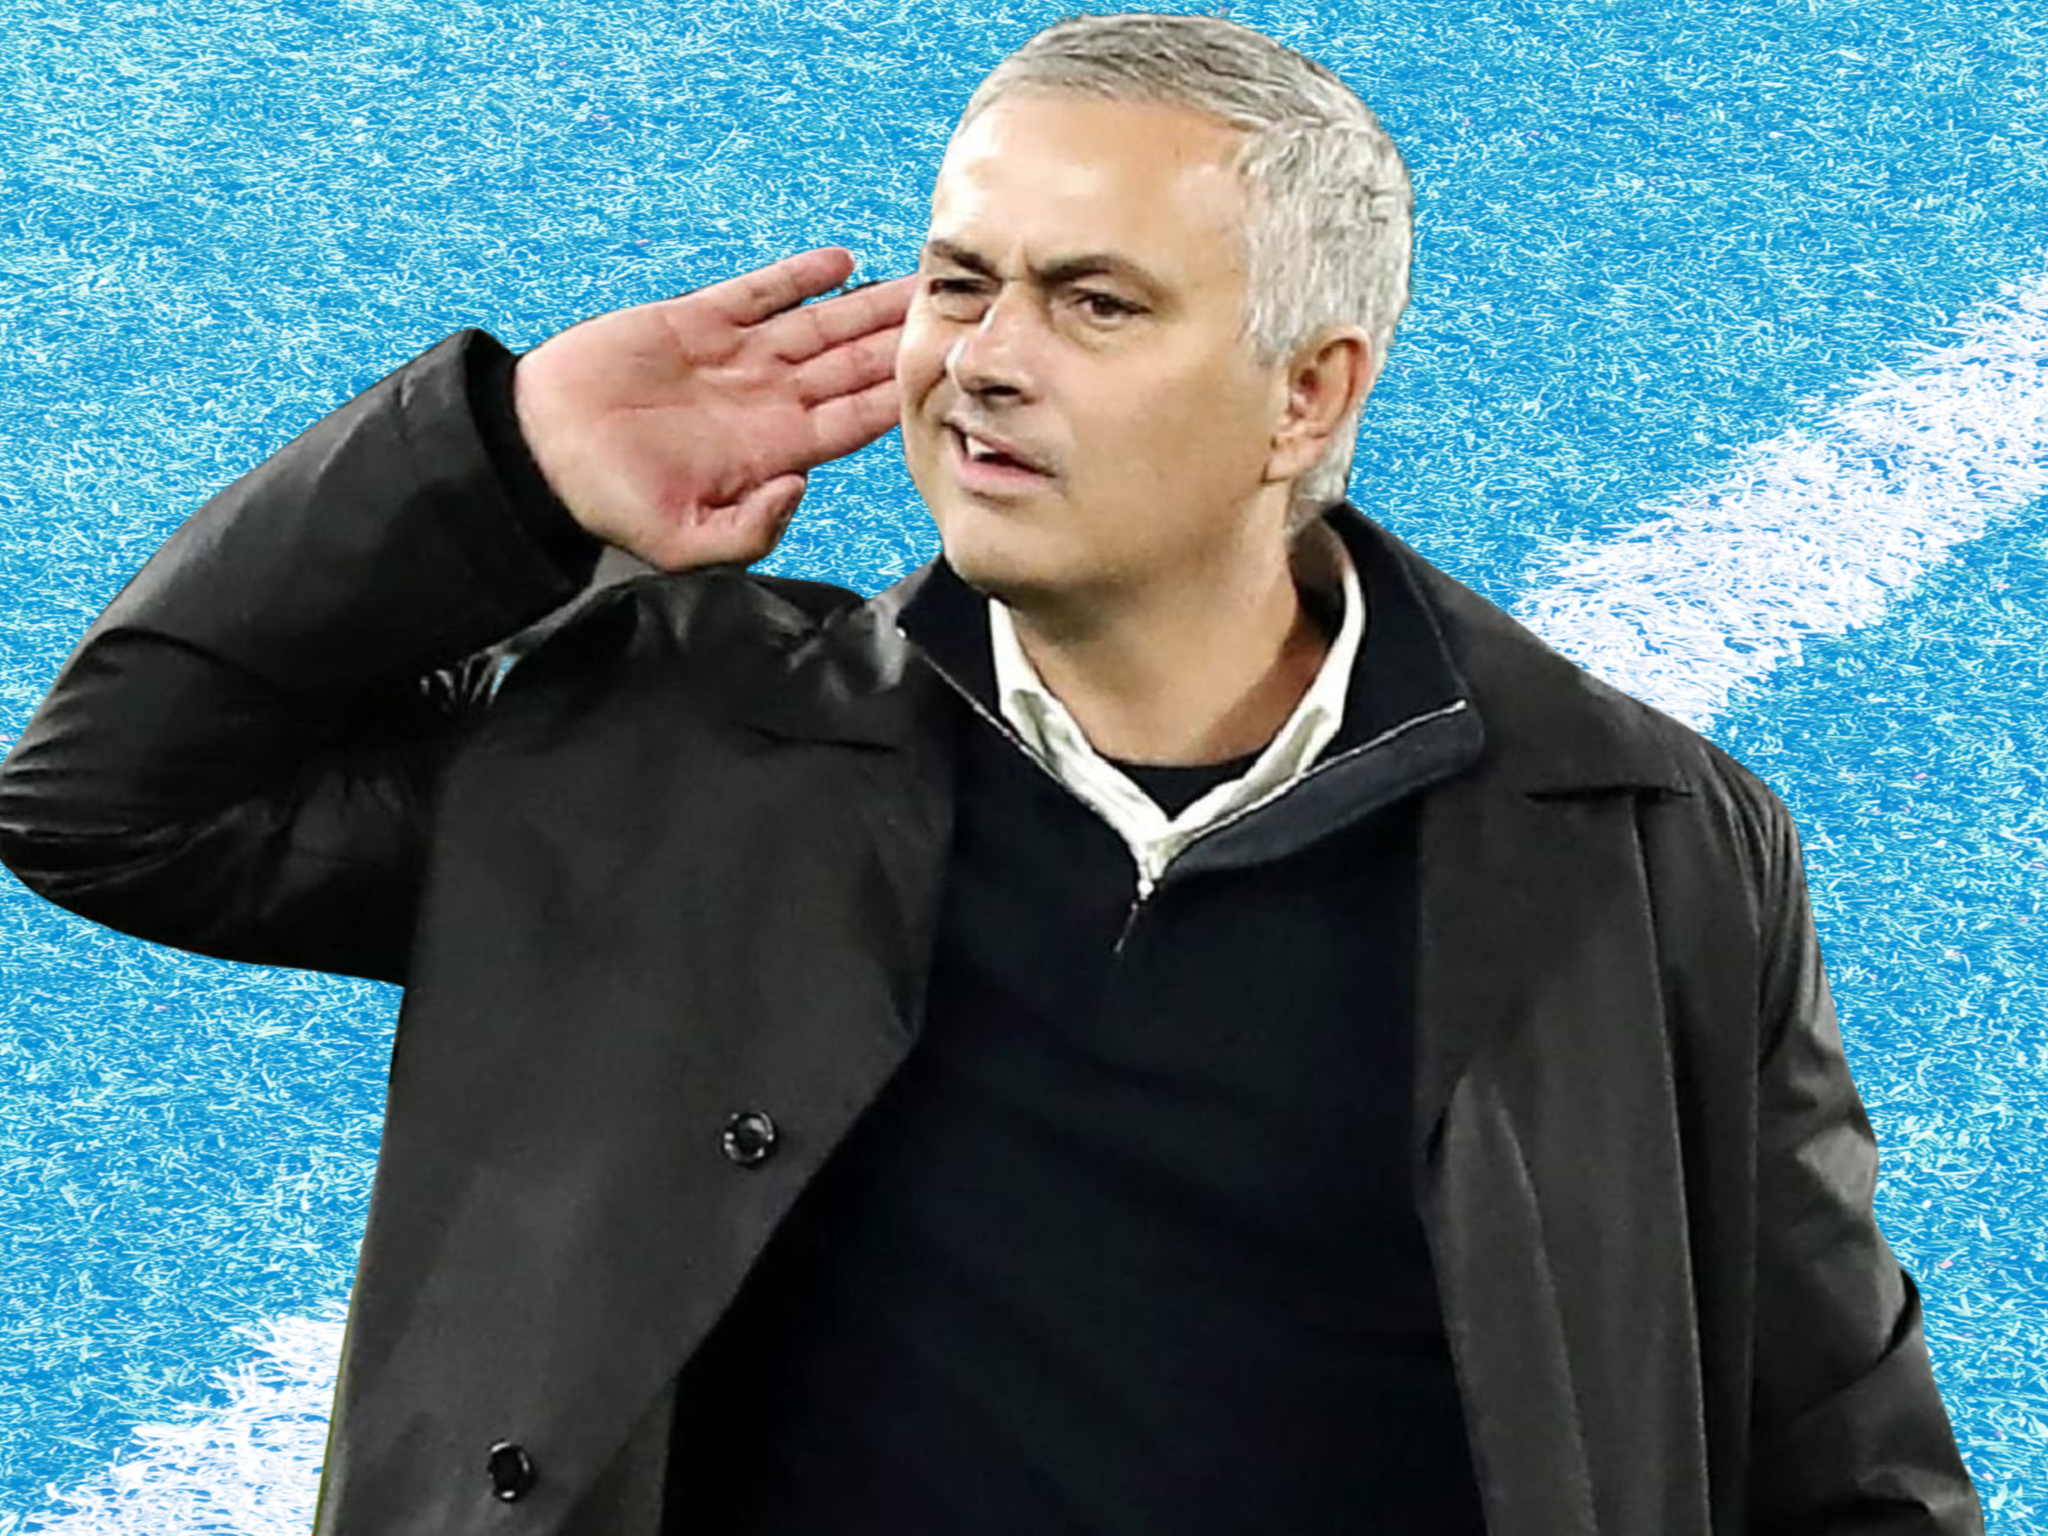 Jose Mourinho is now a social media influencer in news you weren’t expecting to read today